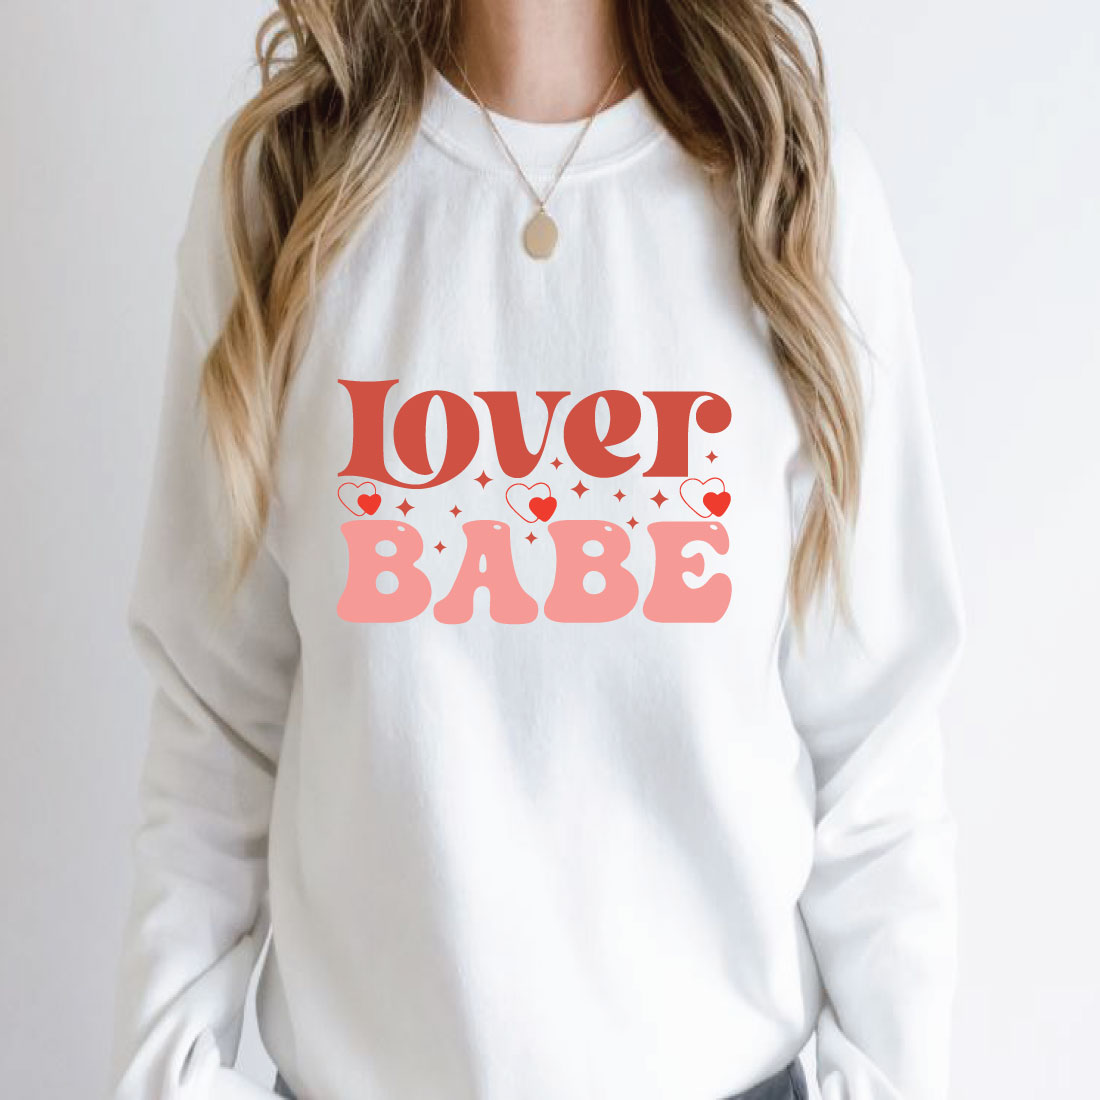 Perfect white sweater for Valentine's day celebrating.